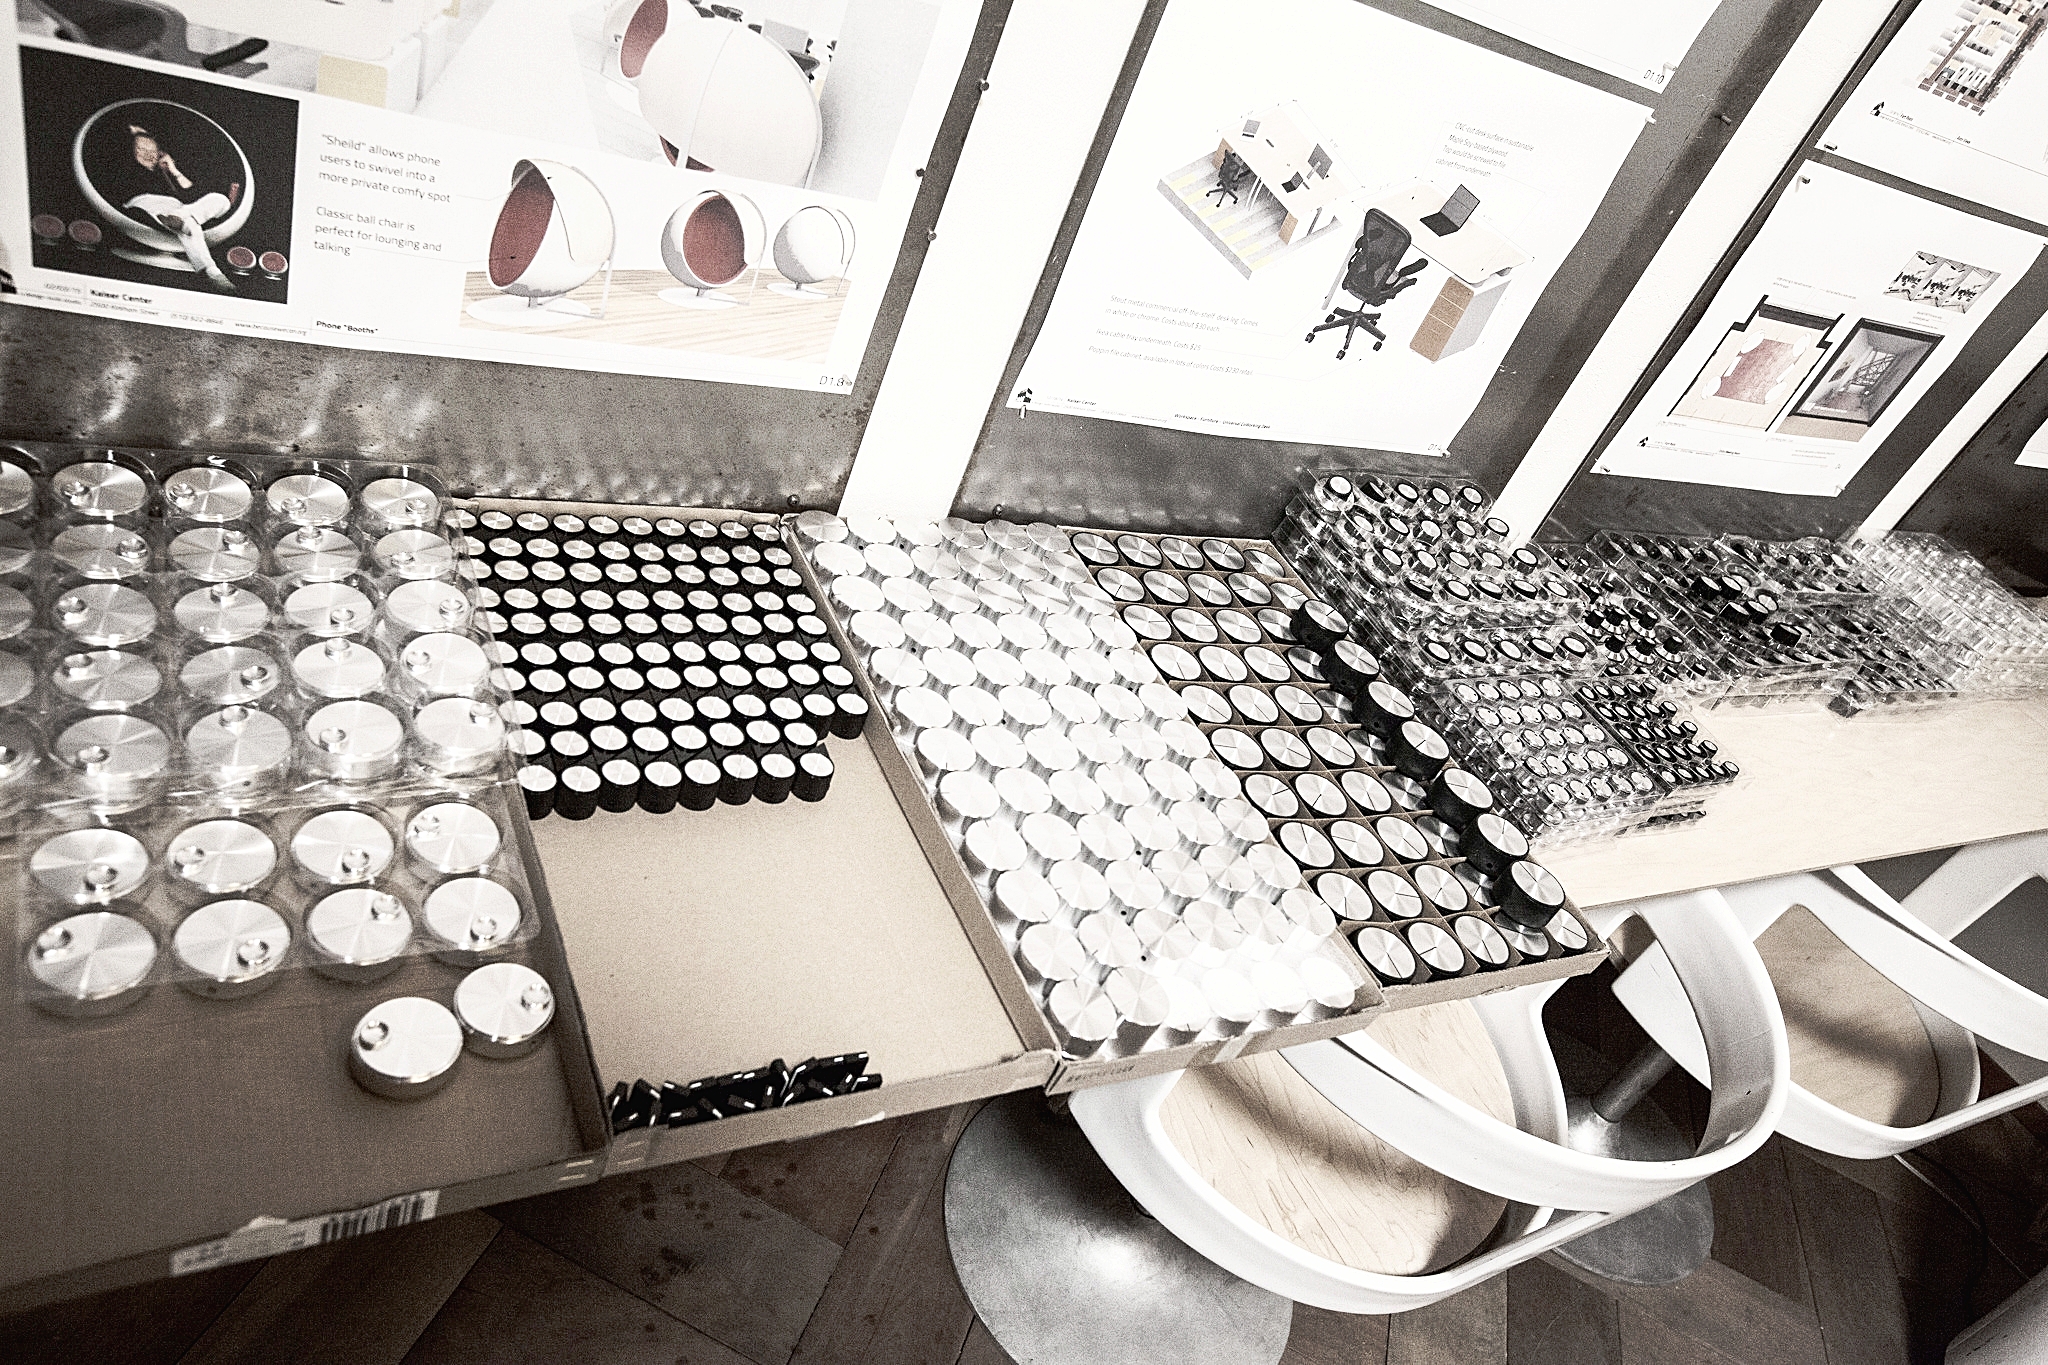  The knobs of different sizes, shapes and rotation capabilities laid out for assembly. 